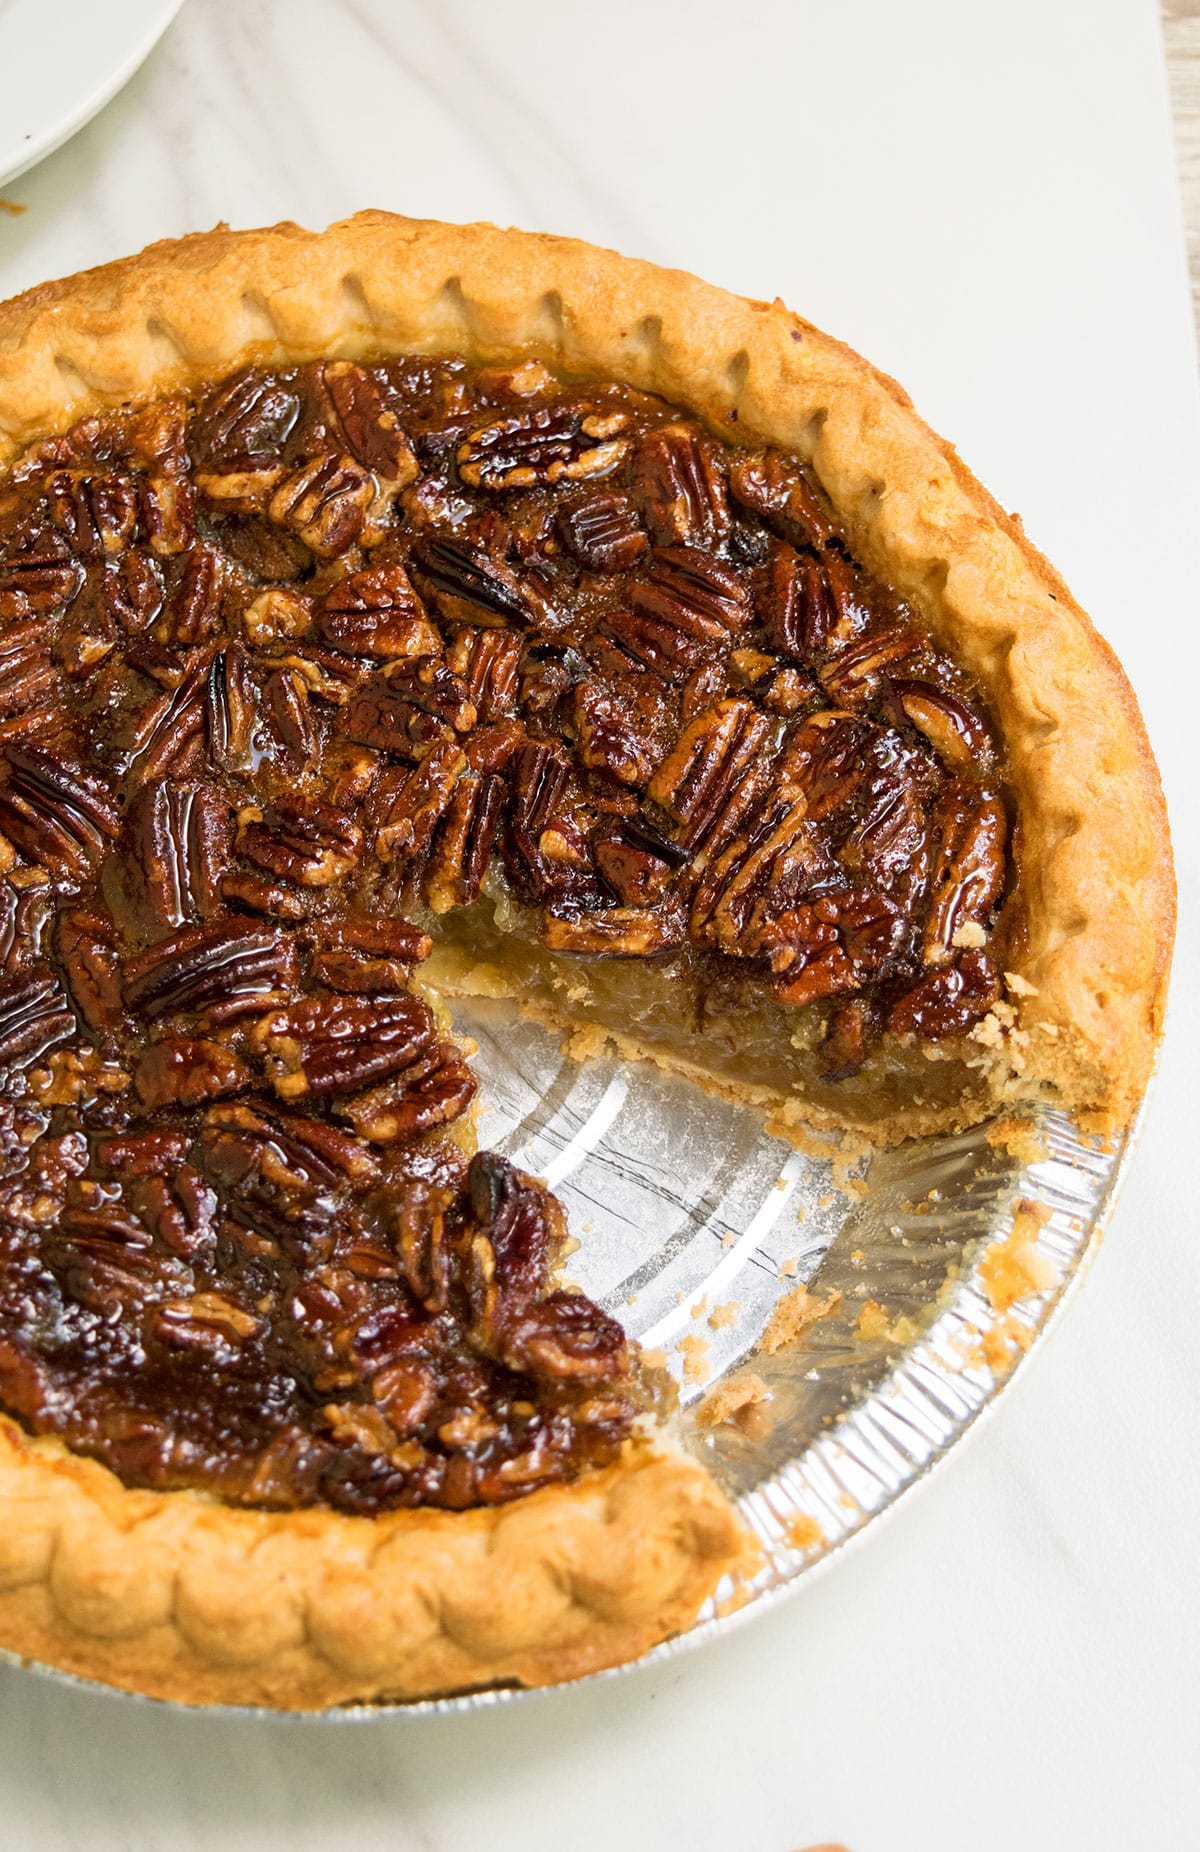 Easy Pecan Pie With One Slice Removed on White Background